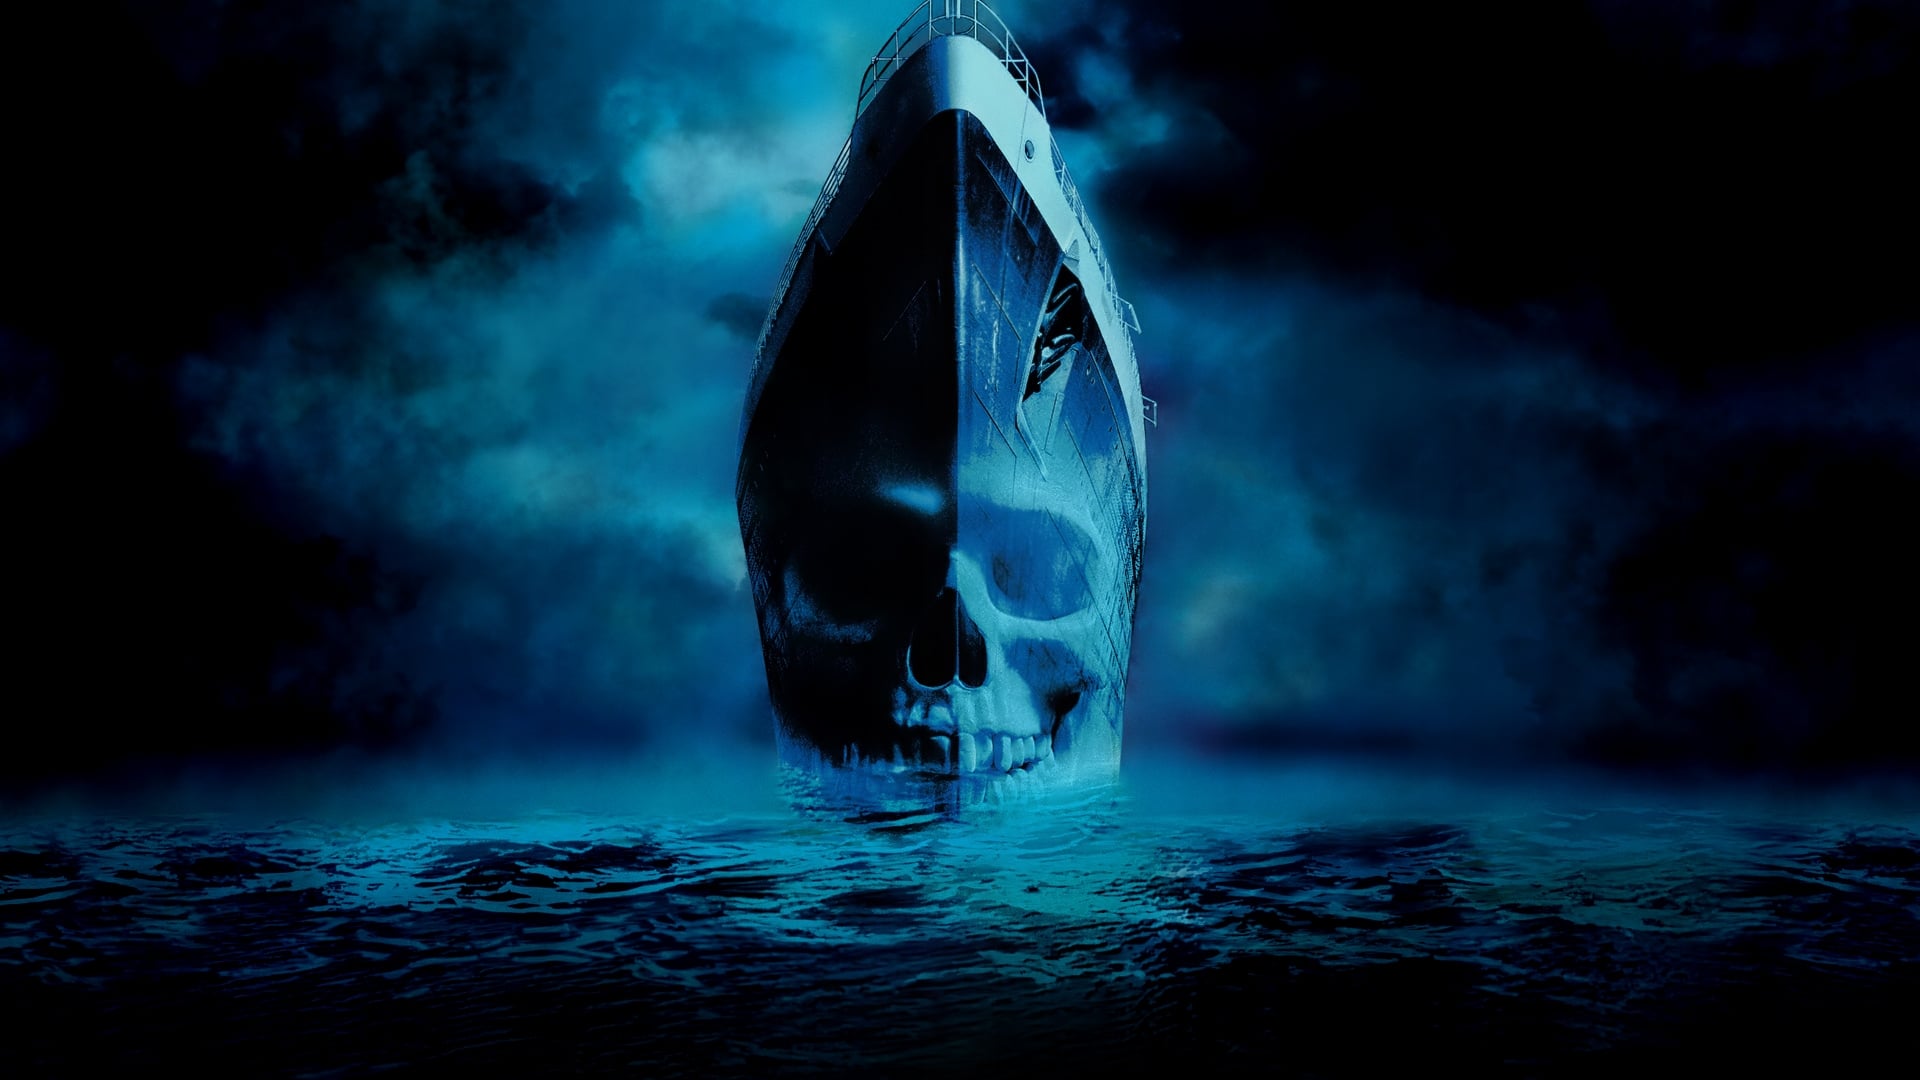 Ghost Ship 2002 123movies